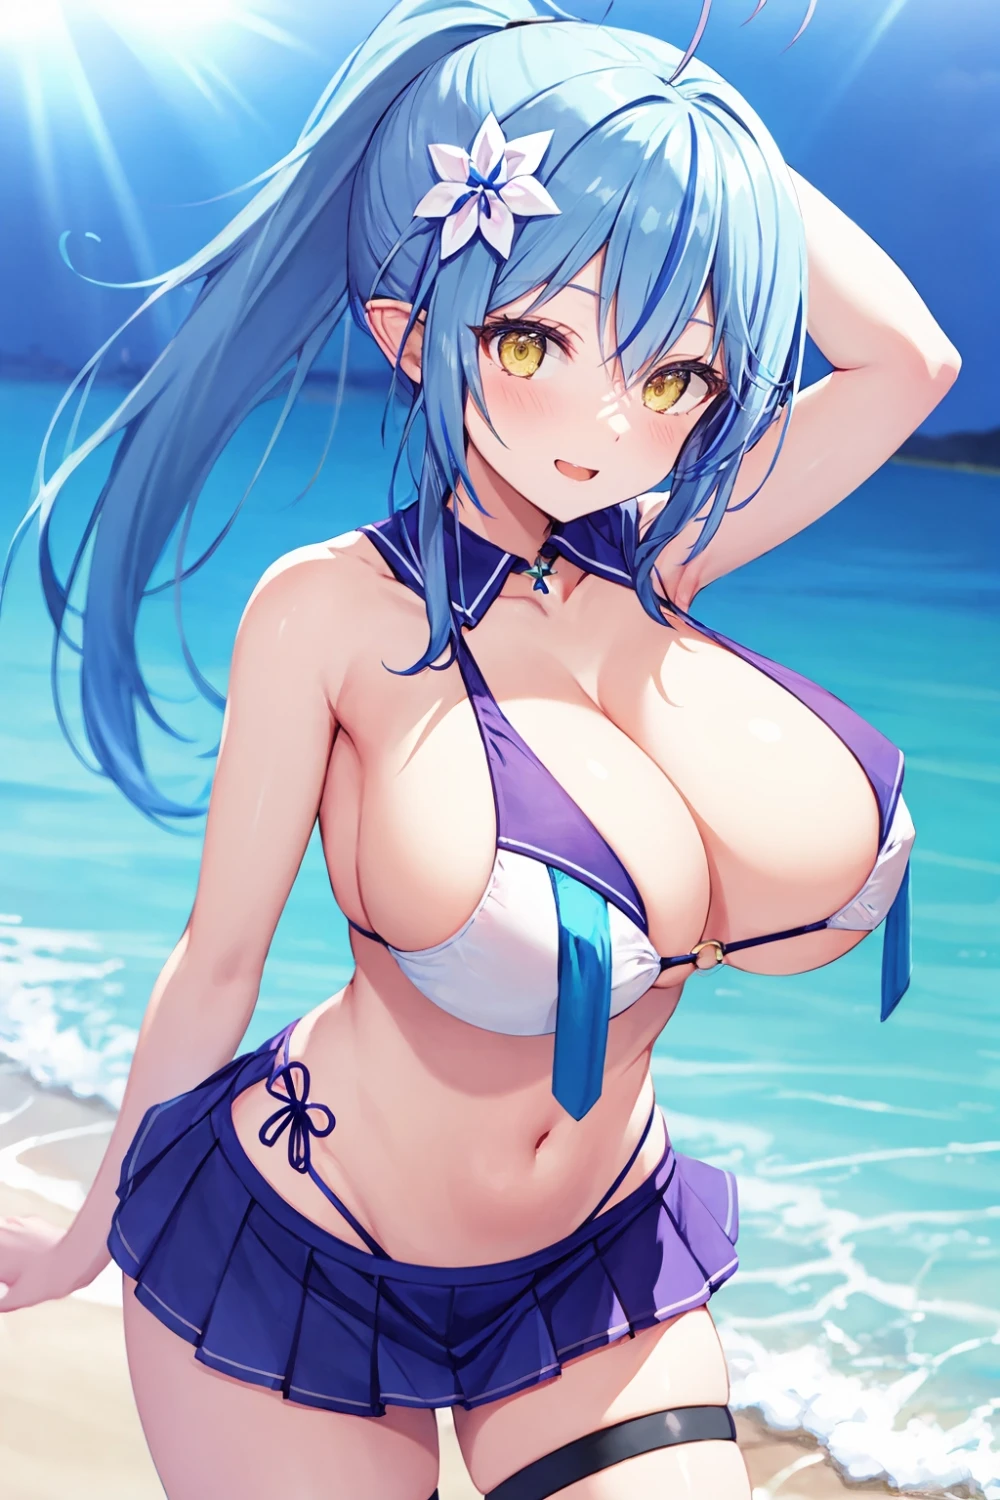 cleavage-anime-style-all-ages-4